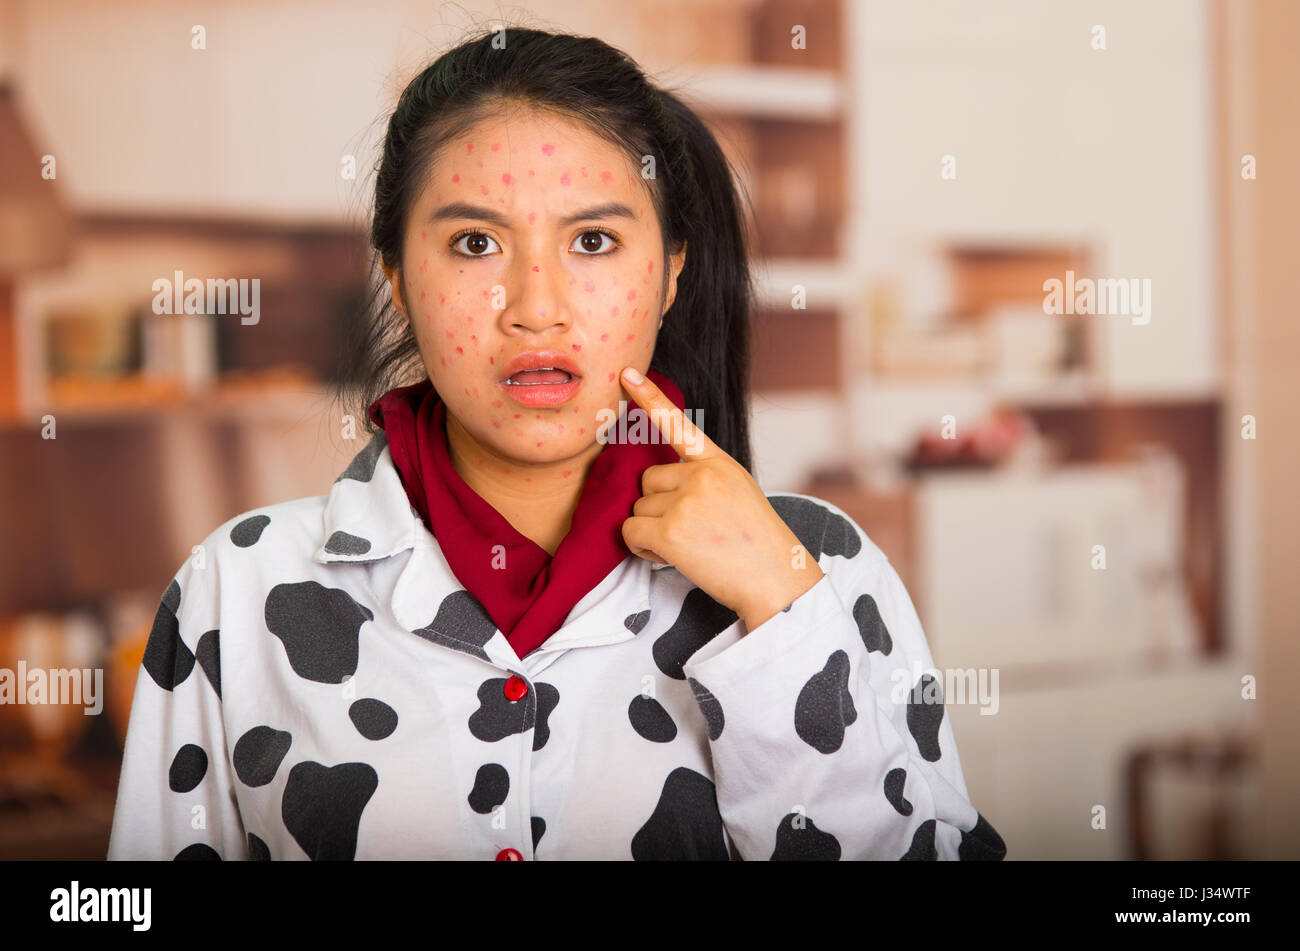 Portrait of young girl with skin problem got surprised Stock Photo